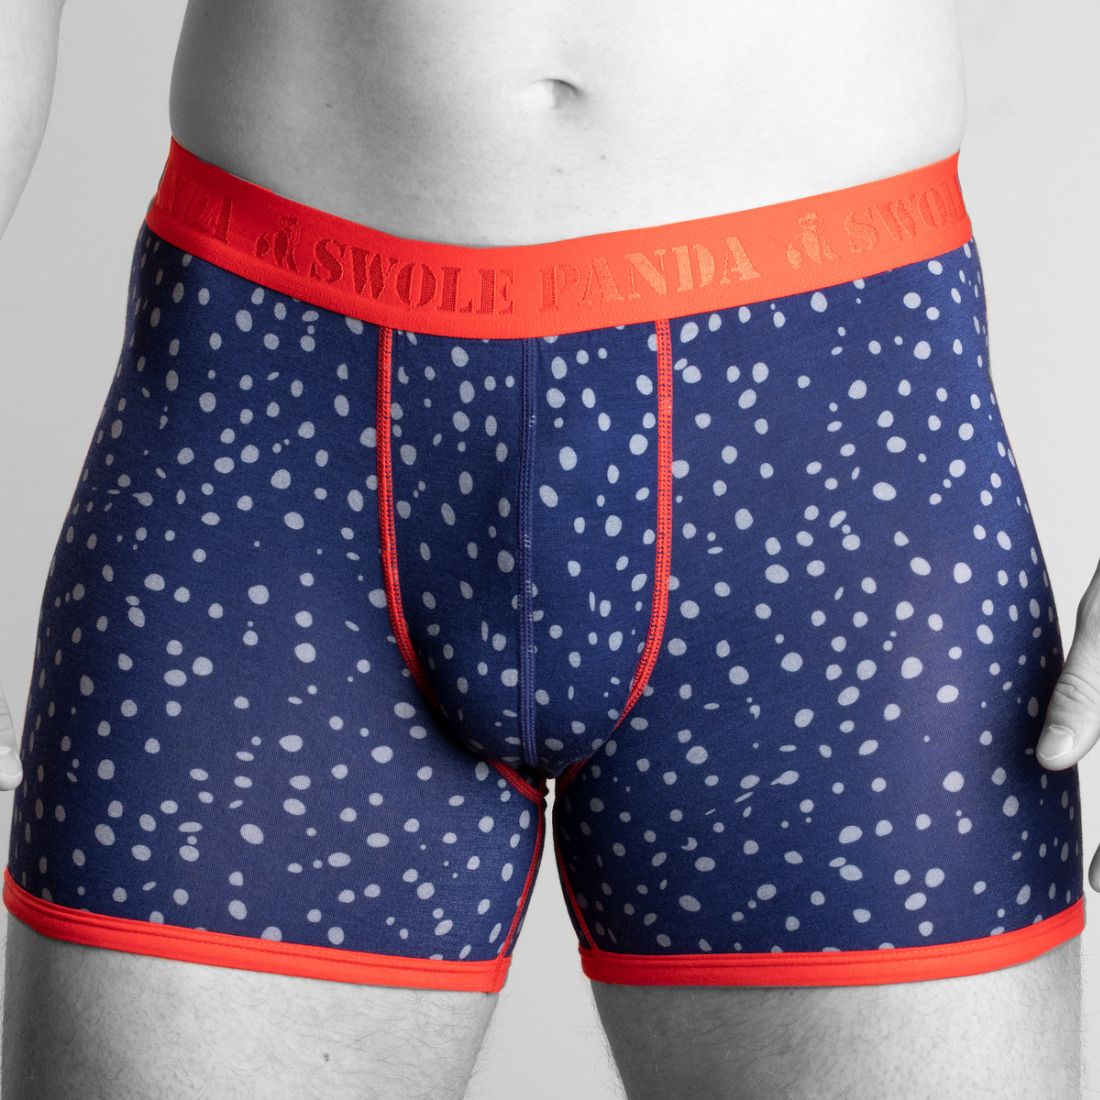 Bamboo Boxers 2 Pack - Red / Grey Spotted